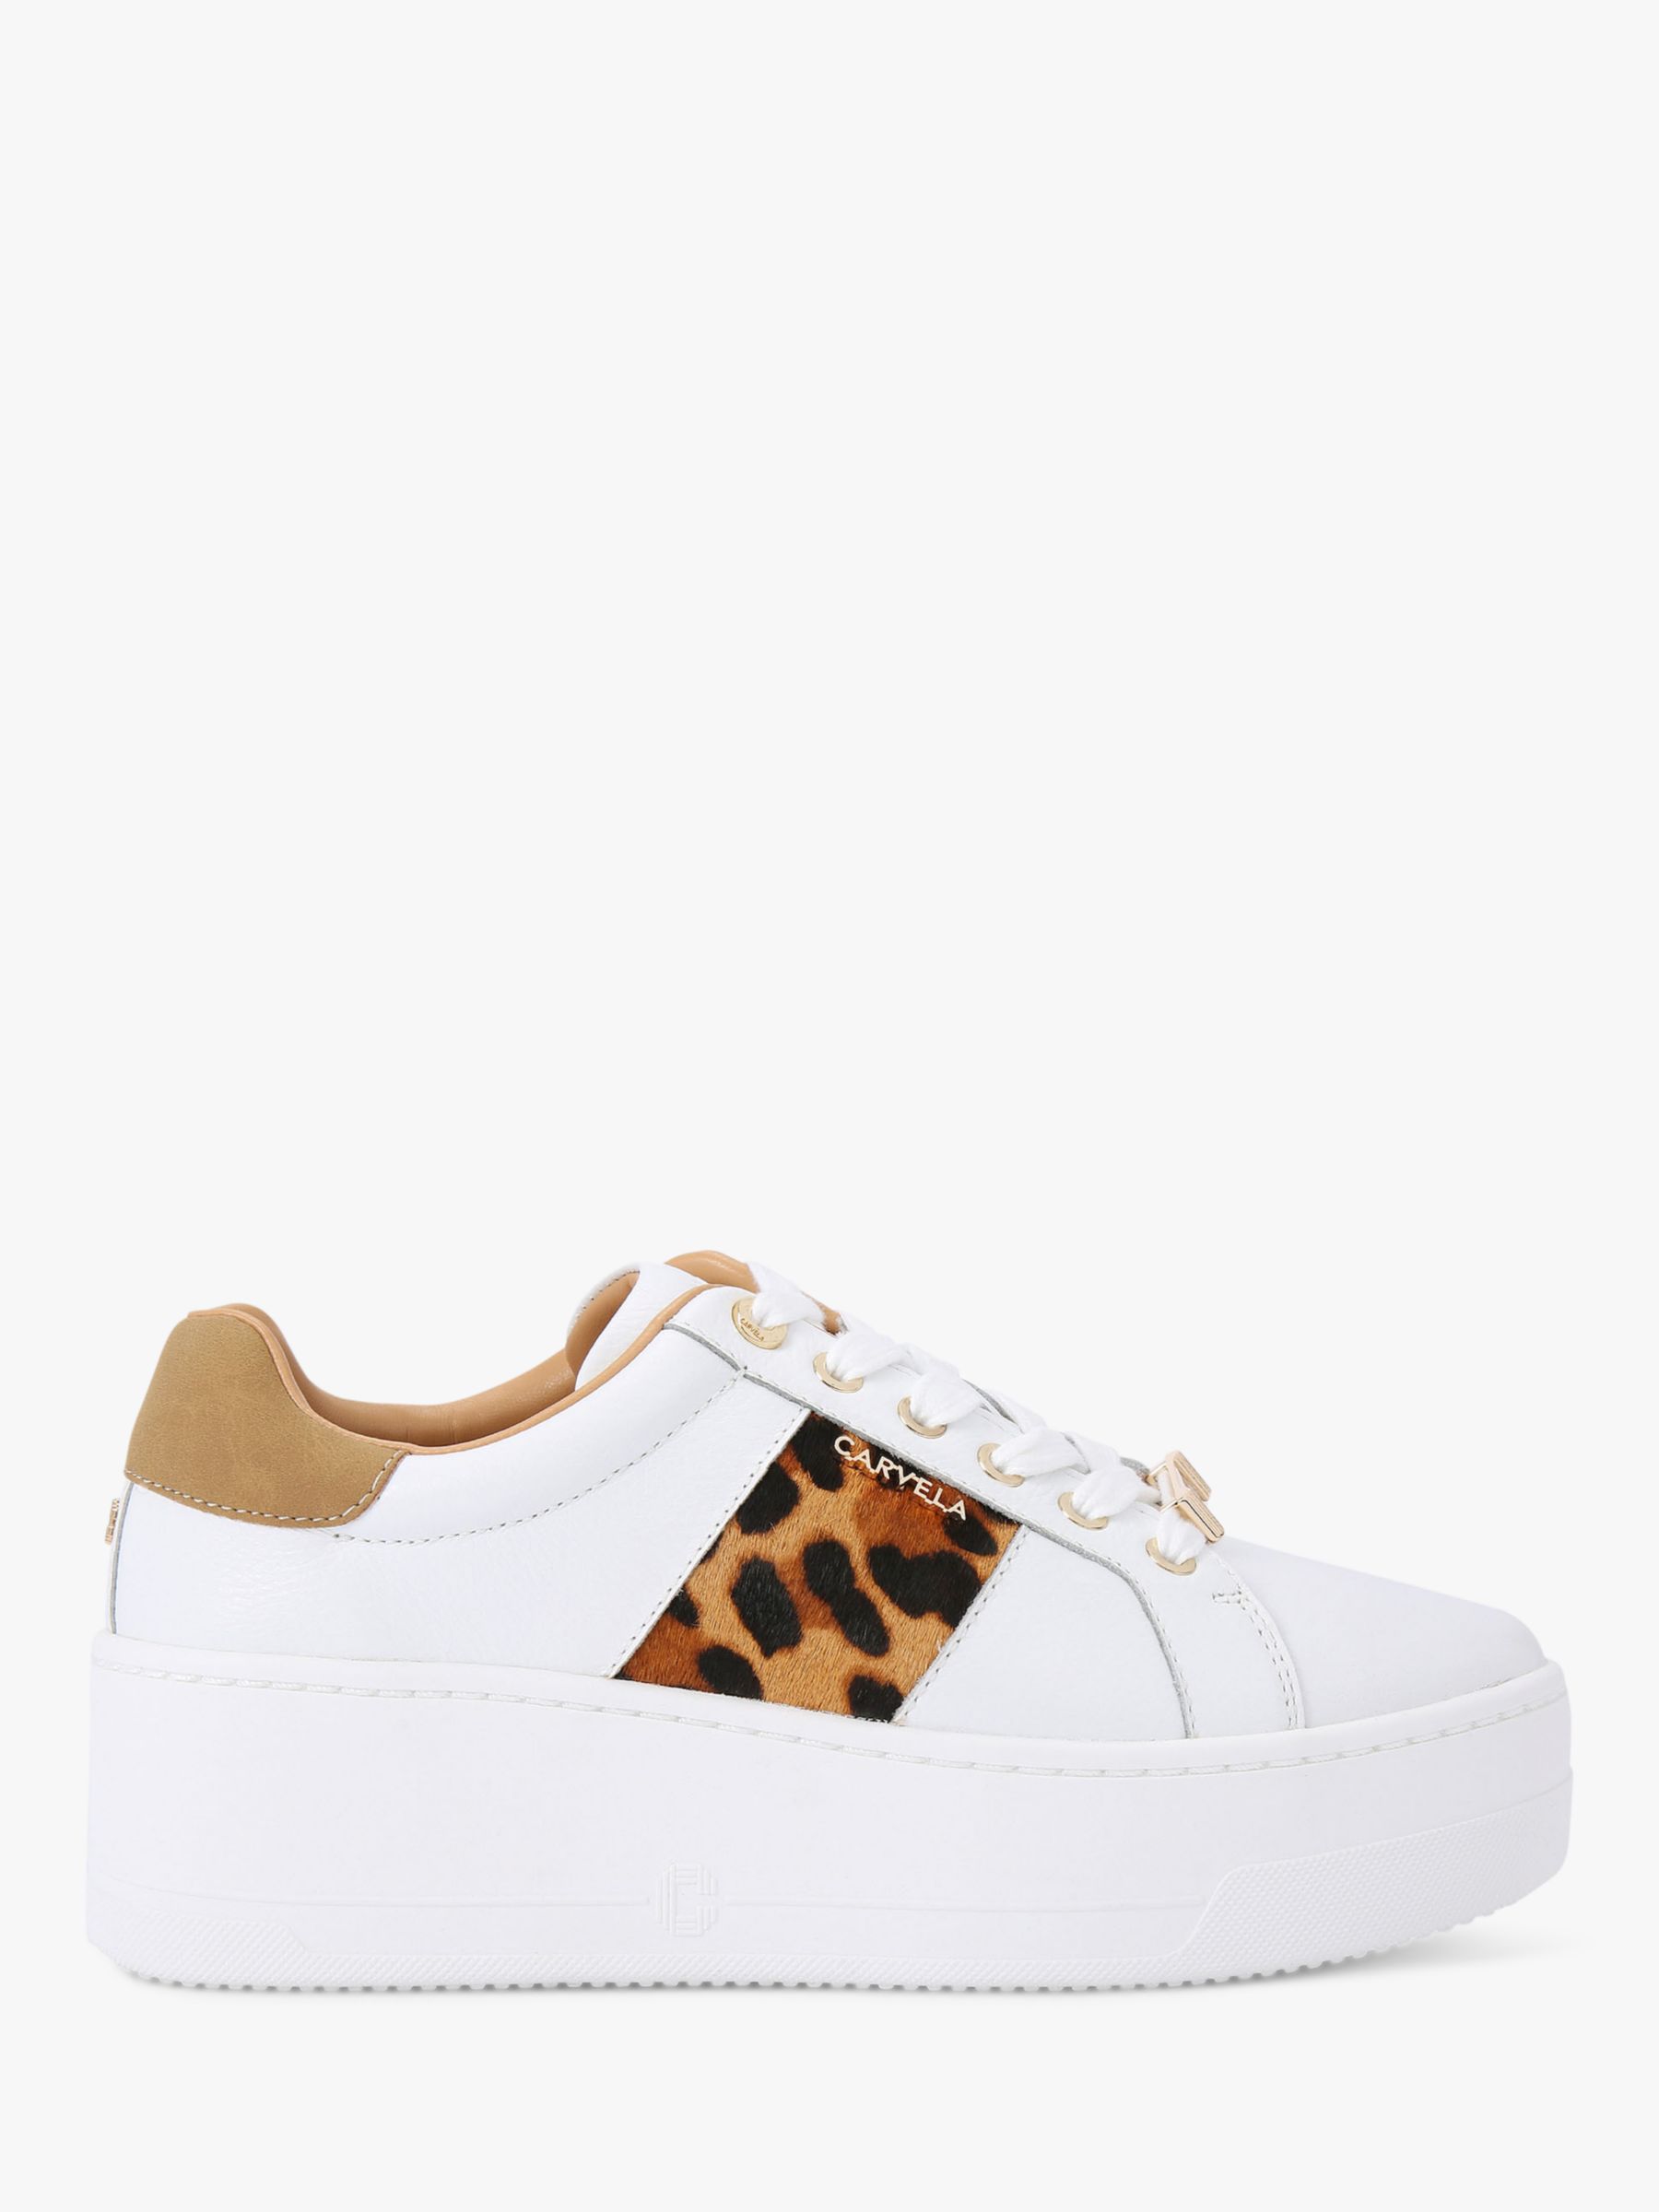 Carvela Connected Leopard Print Flatform Chunky Trainers, White/Multi ...